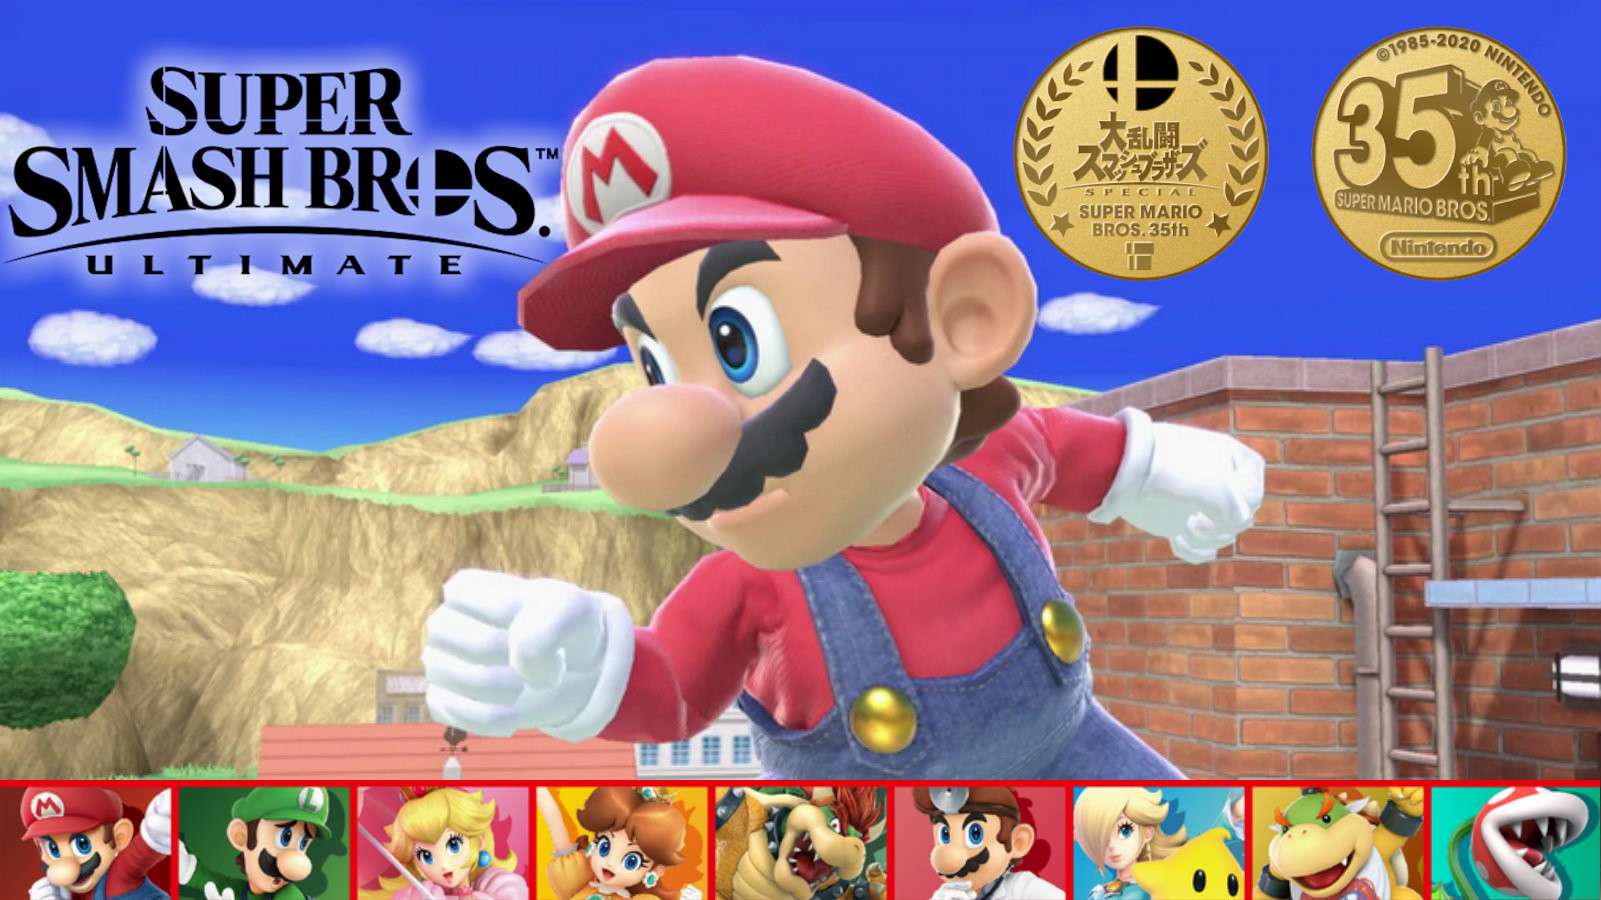 Mario Bros is getting a major tournament in Smash Ultimate